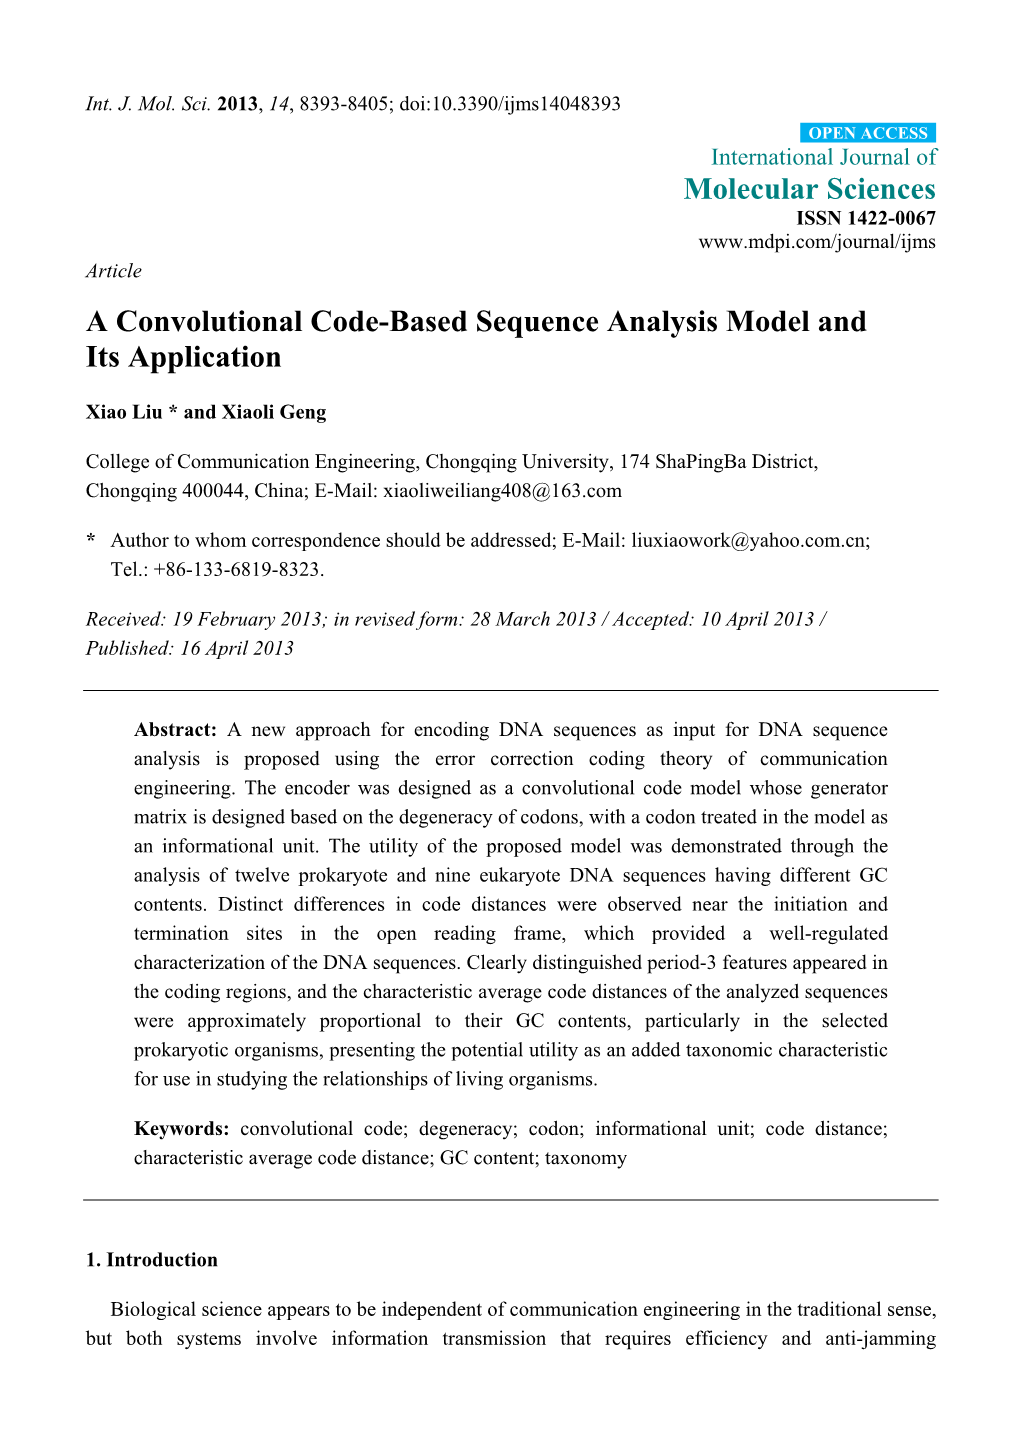 A Convolutional Code-Based Sequence Analysis Model and Its Application